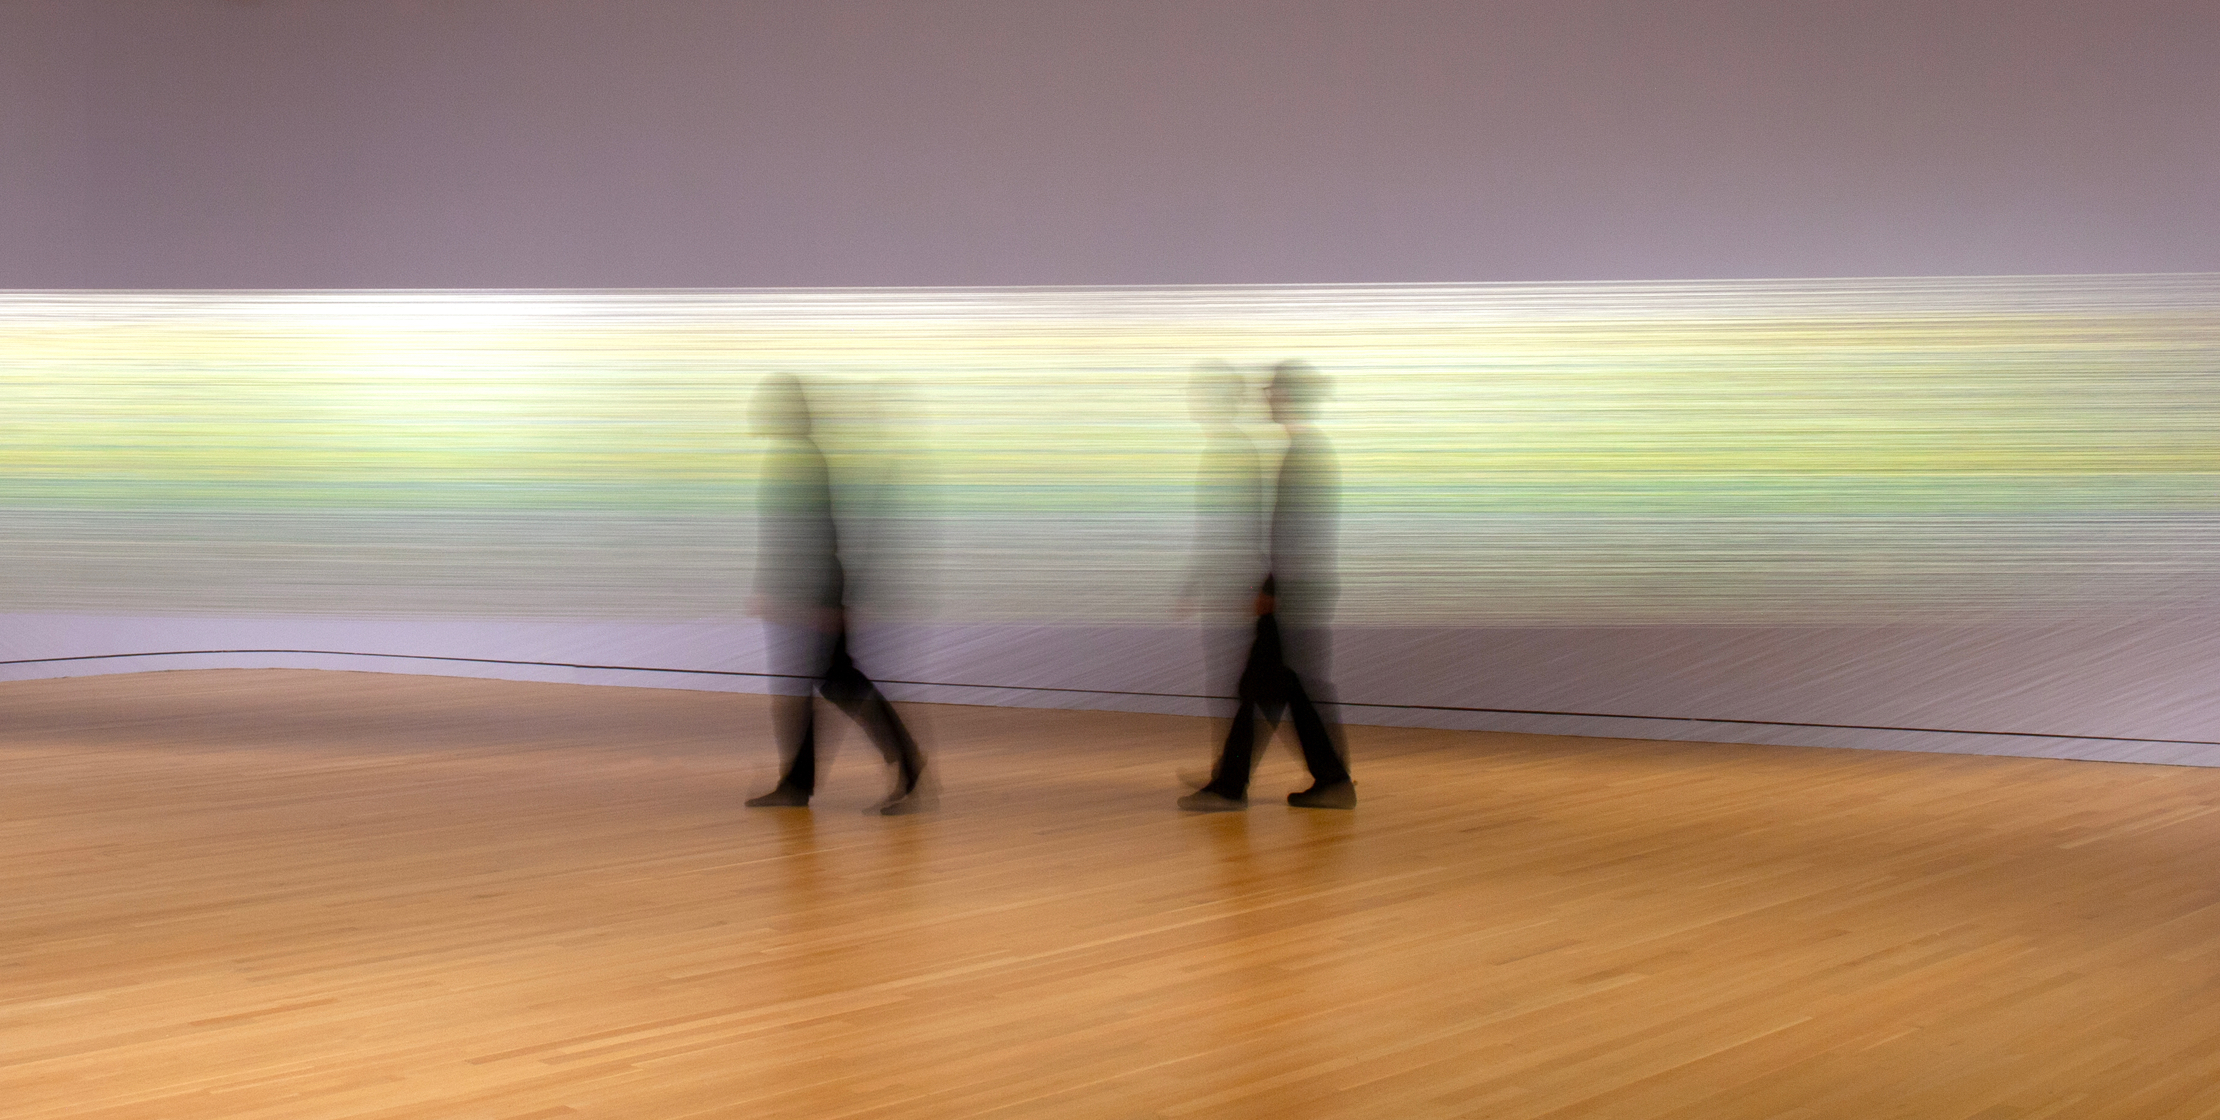 Two blurred figures in black walk in front of an art installation of bright threads strung between two walls.